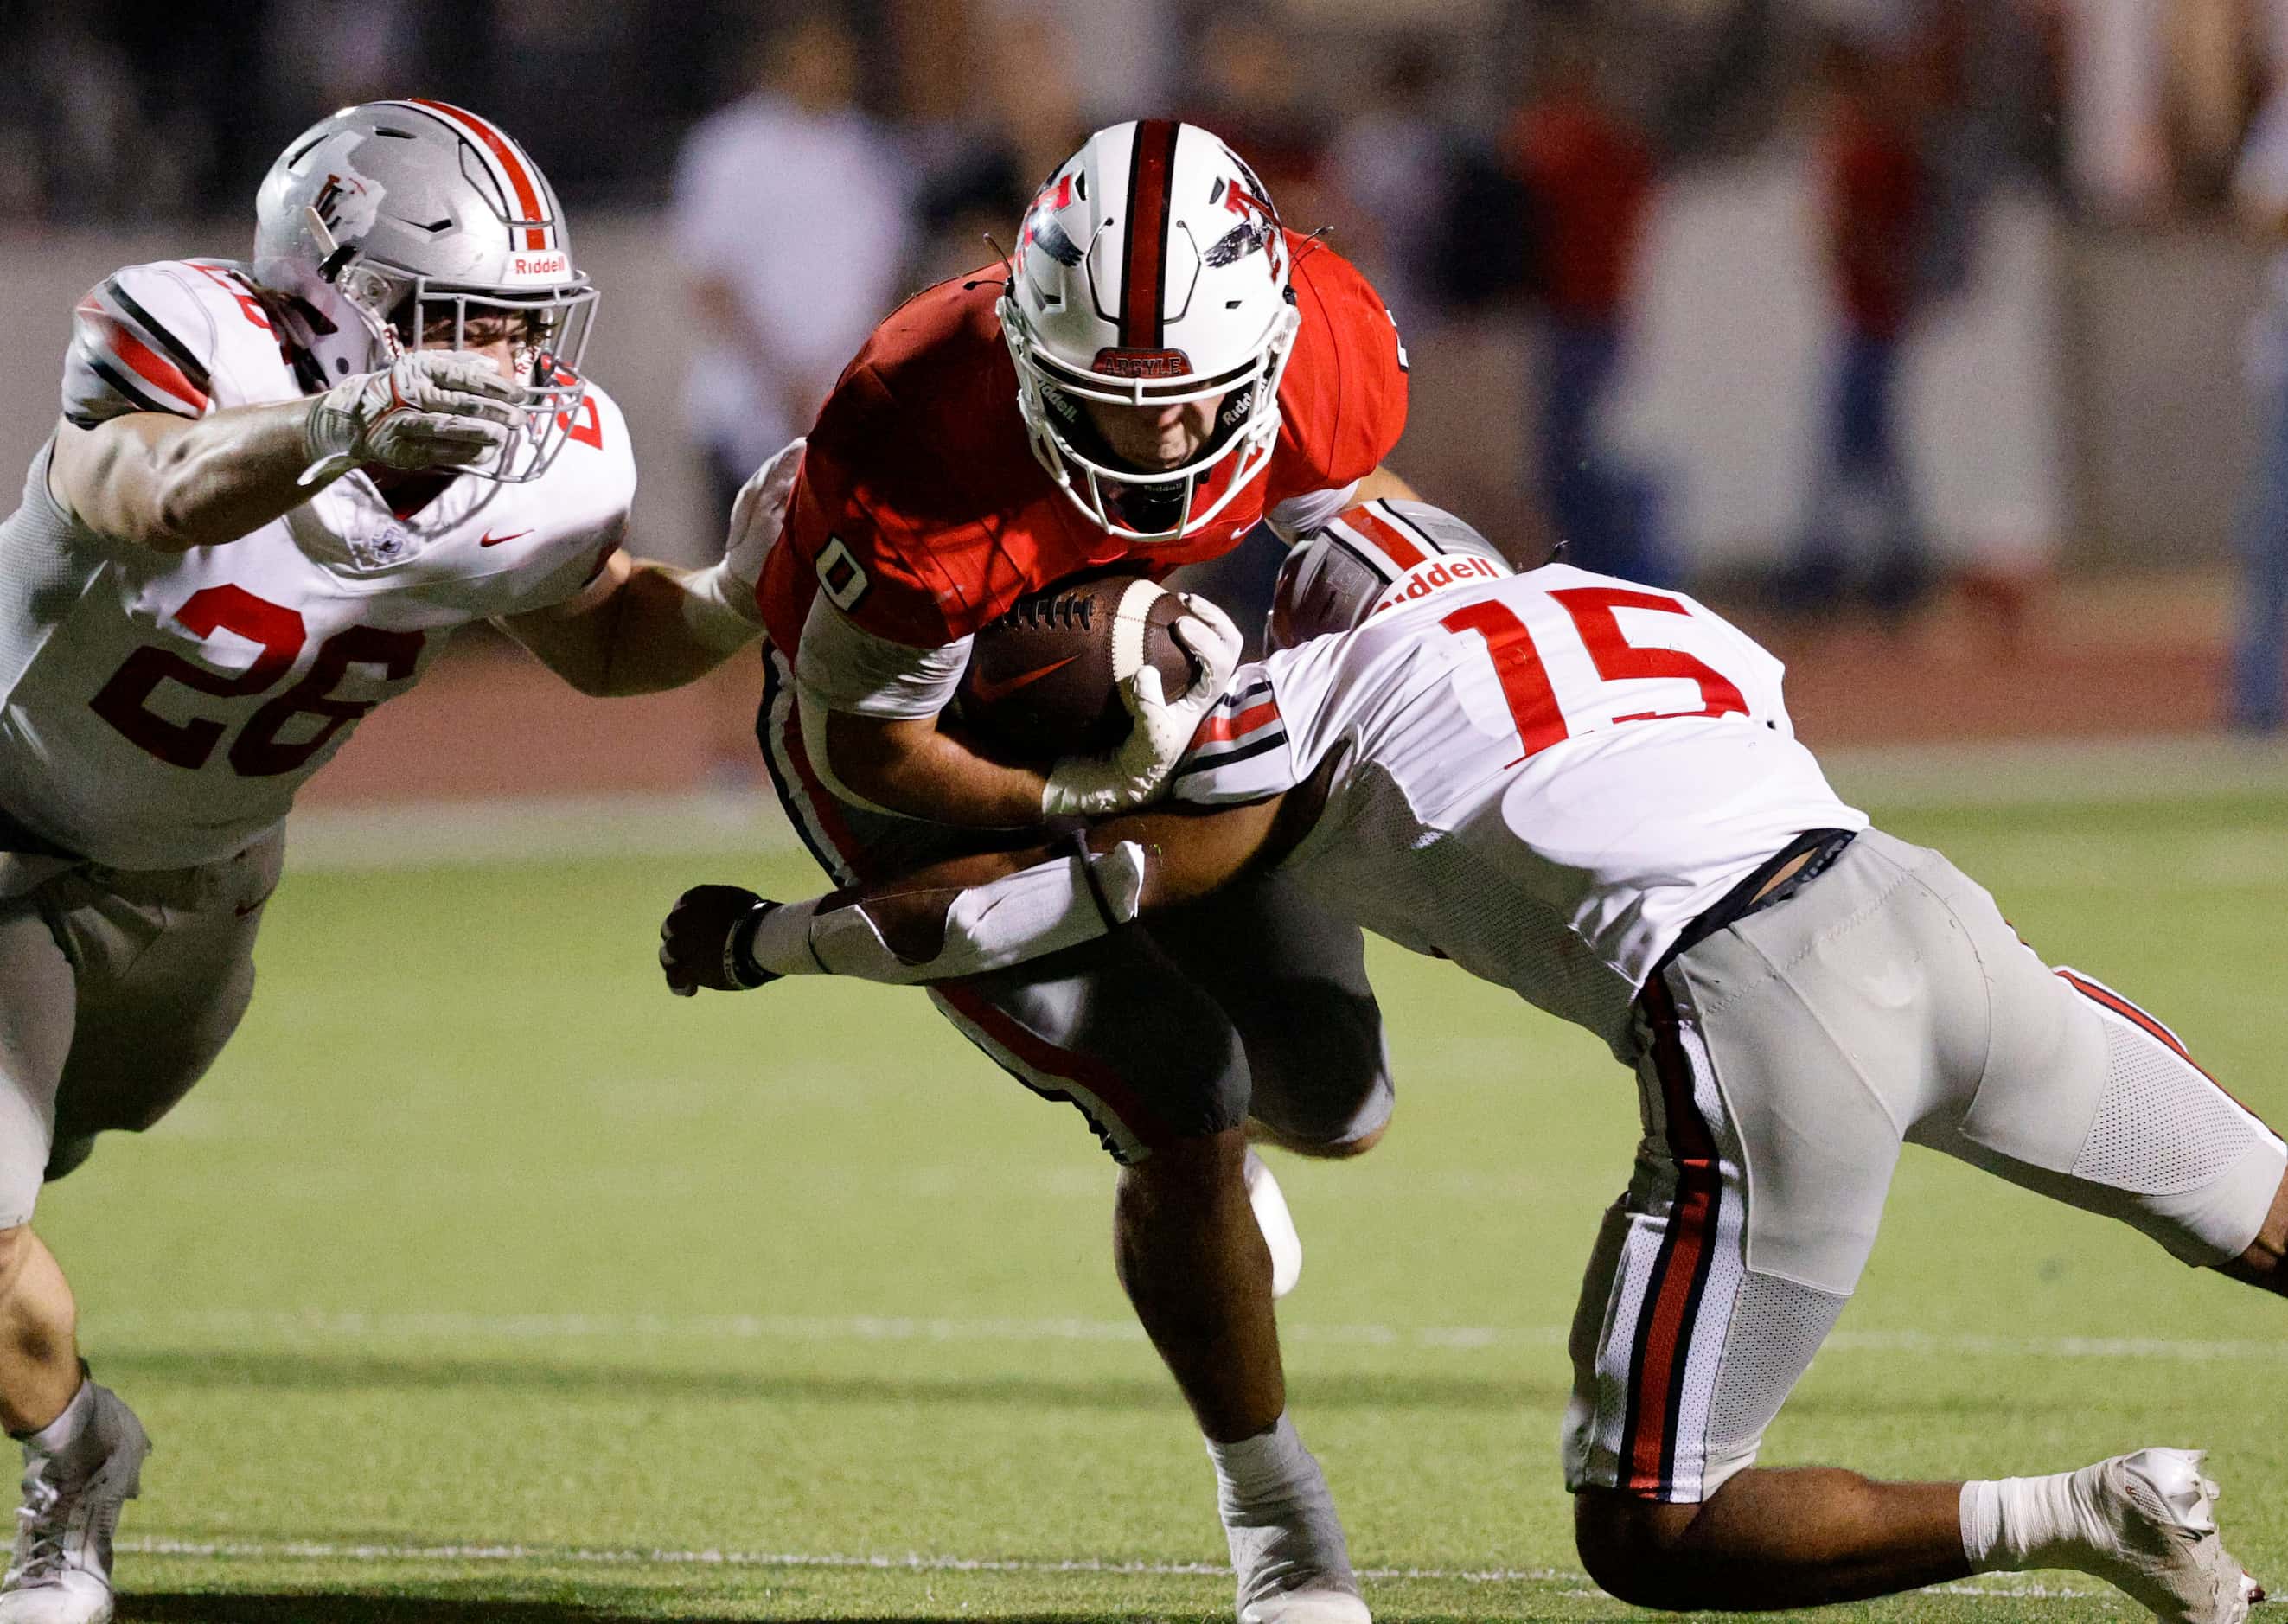 Argyle's Devon Owen (0) is tackled by Lovejoy's Aarren Marshall (15) and Lovejoy's Payton...